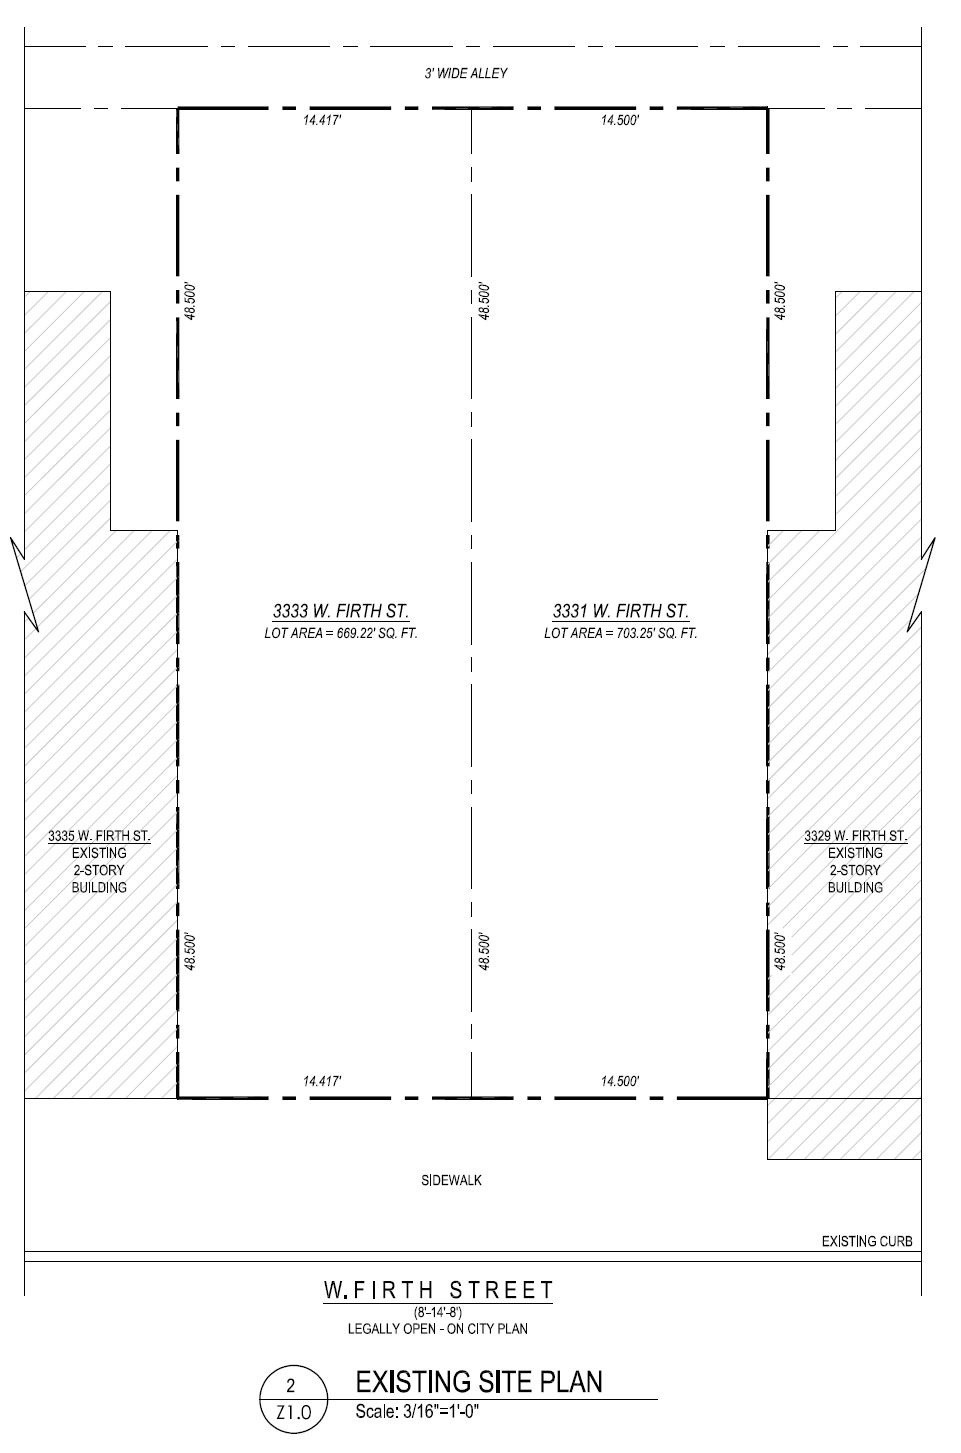 3331 West Firth Street. Existing site plan. Credit: 24/7 Design Group via the City of Philadelphia